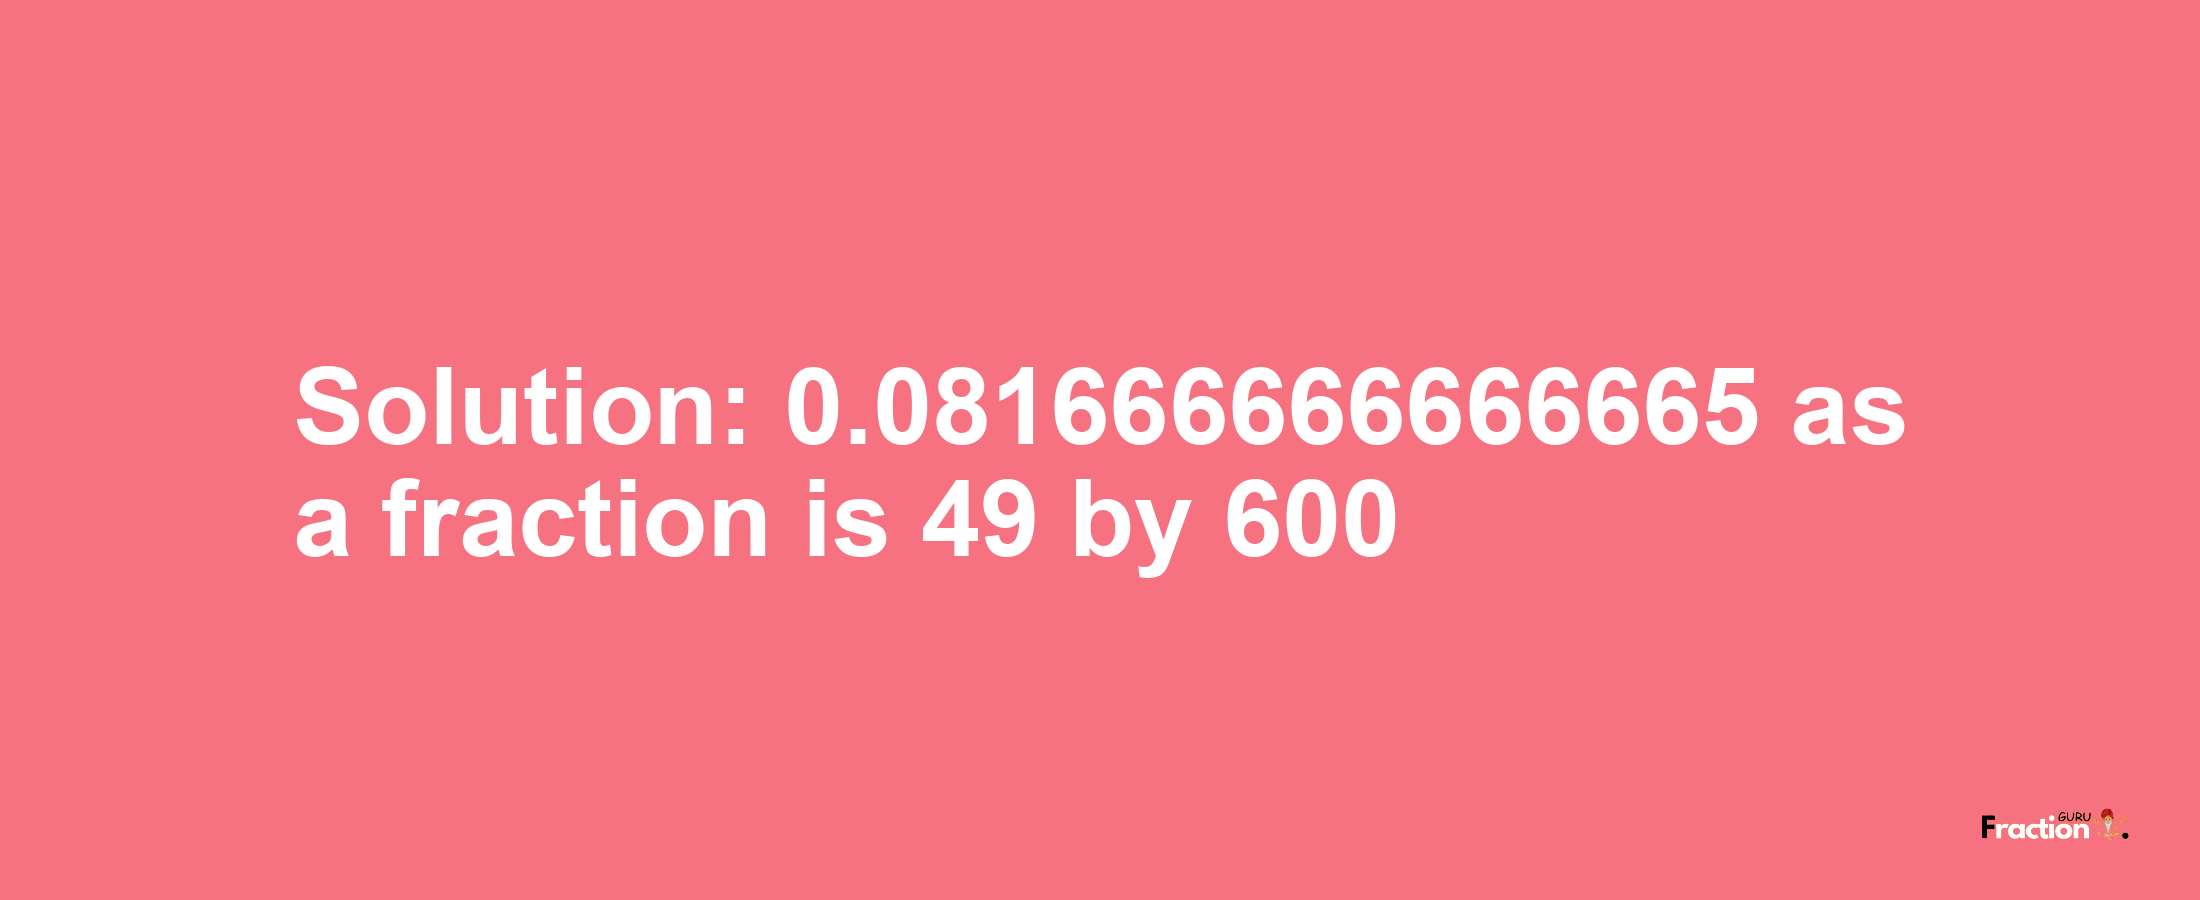 Solution:0.081666666666665 as a fraction is 49/600